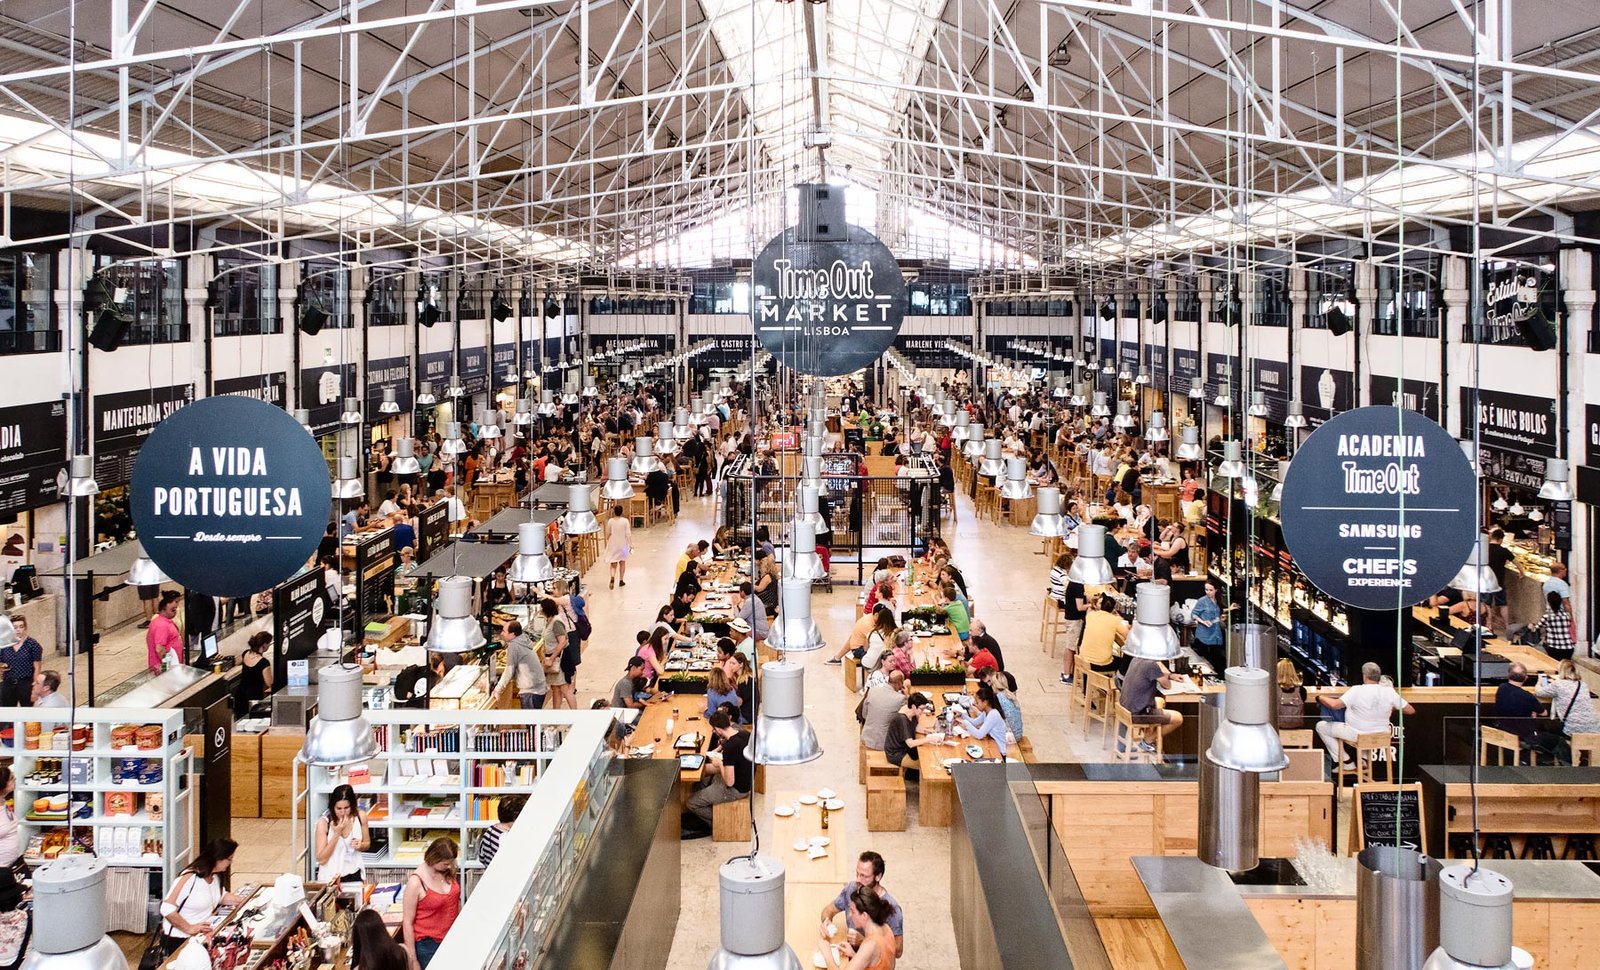 This Is How You Eat Your Way Through Lisbon. The best tips for where to eat and drink in Lisbon, Portugal. Time Out Market Lisboa.